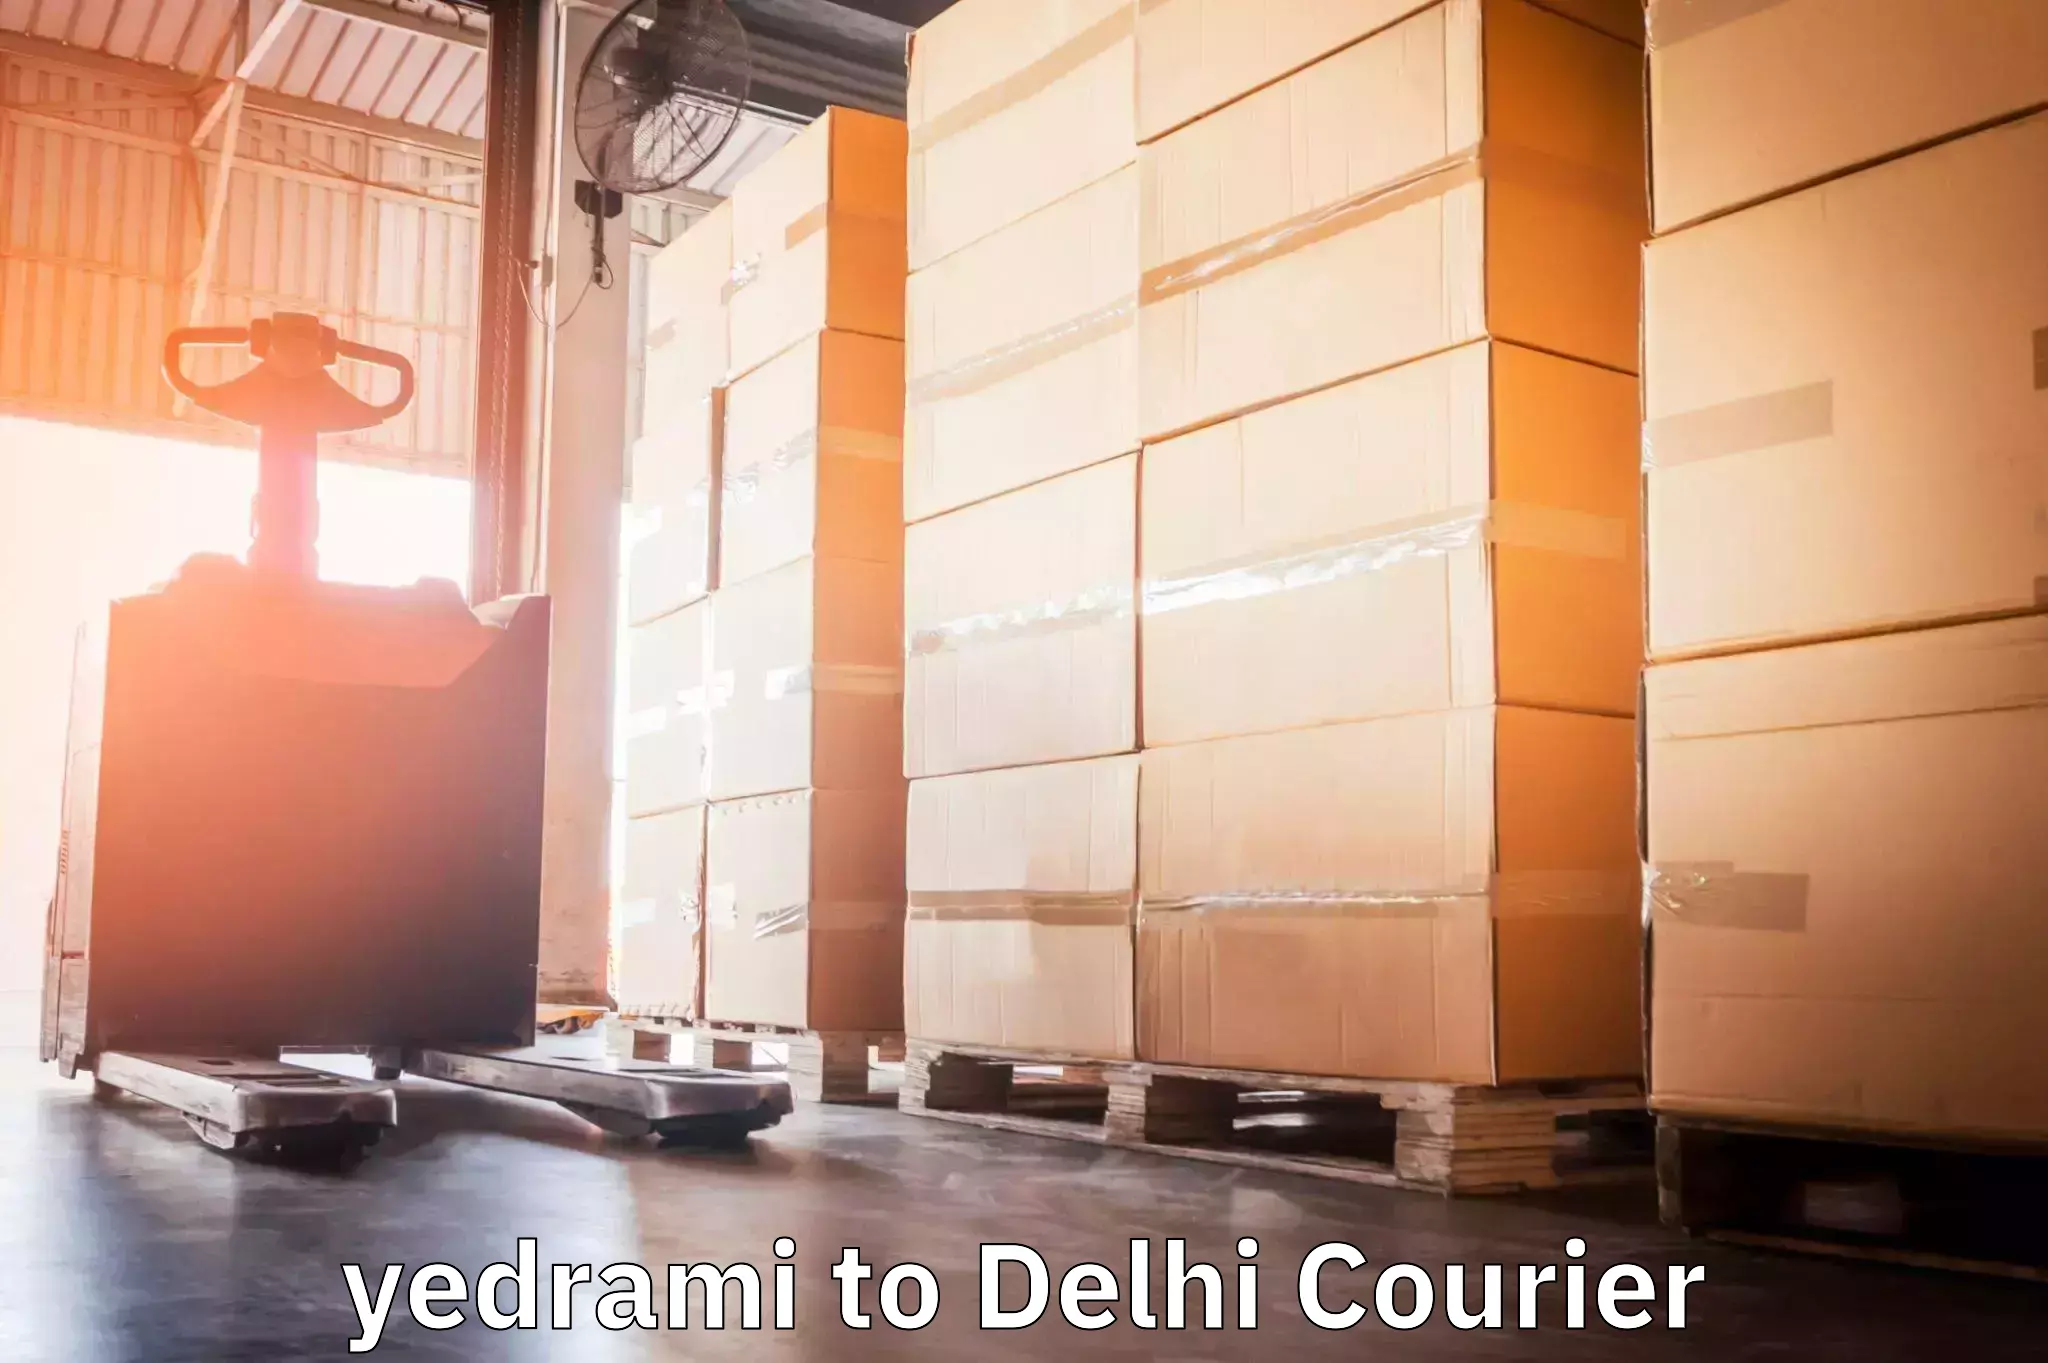 Next-day delivery options yedrami to Lodhi Road